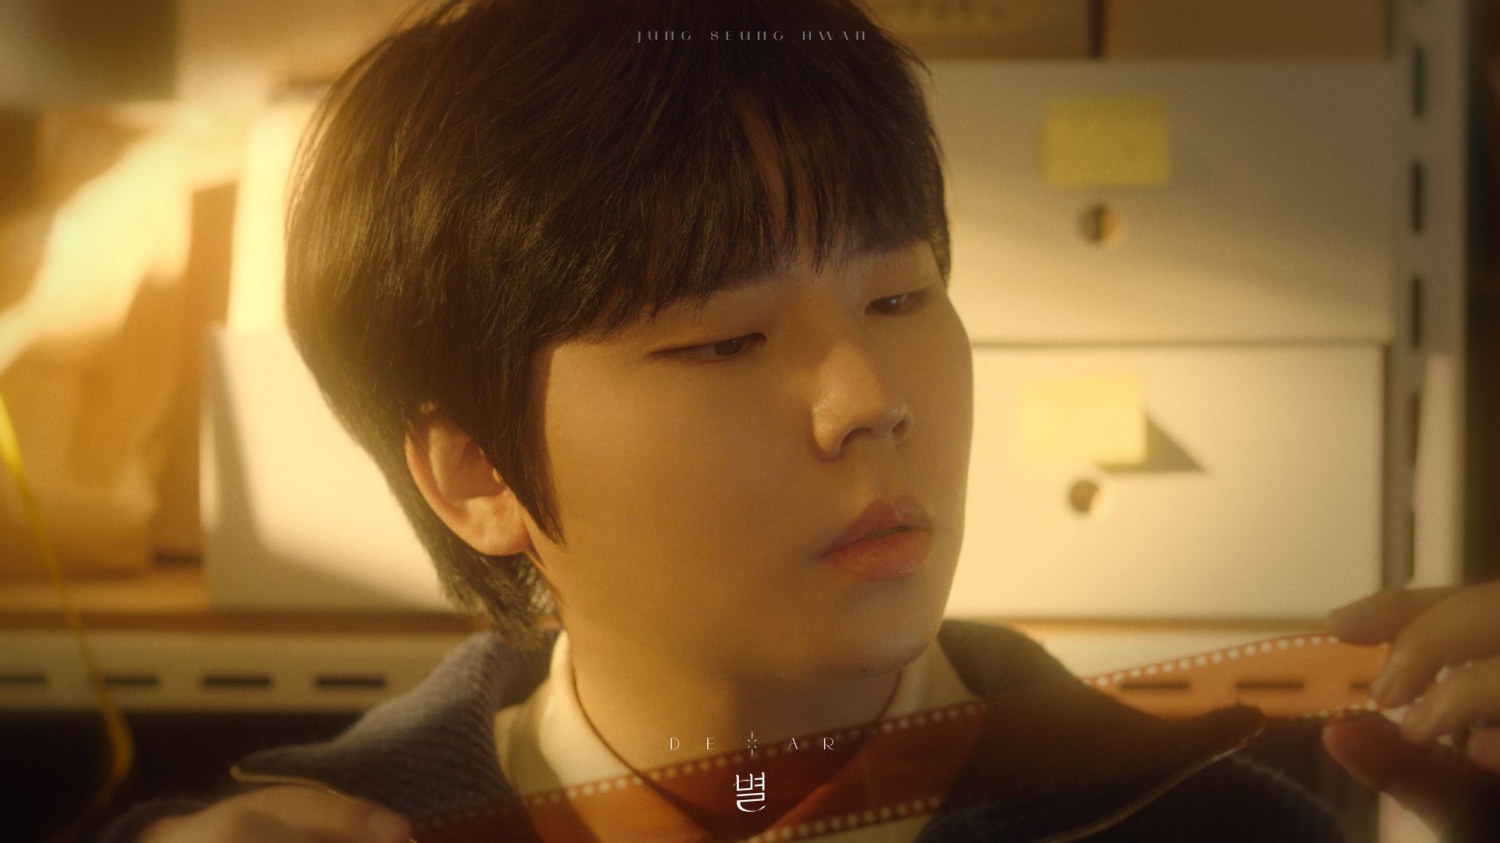 Jung Seung Hwan releases new song 'Dear'... A winter ballad to believe and listen to is coming